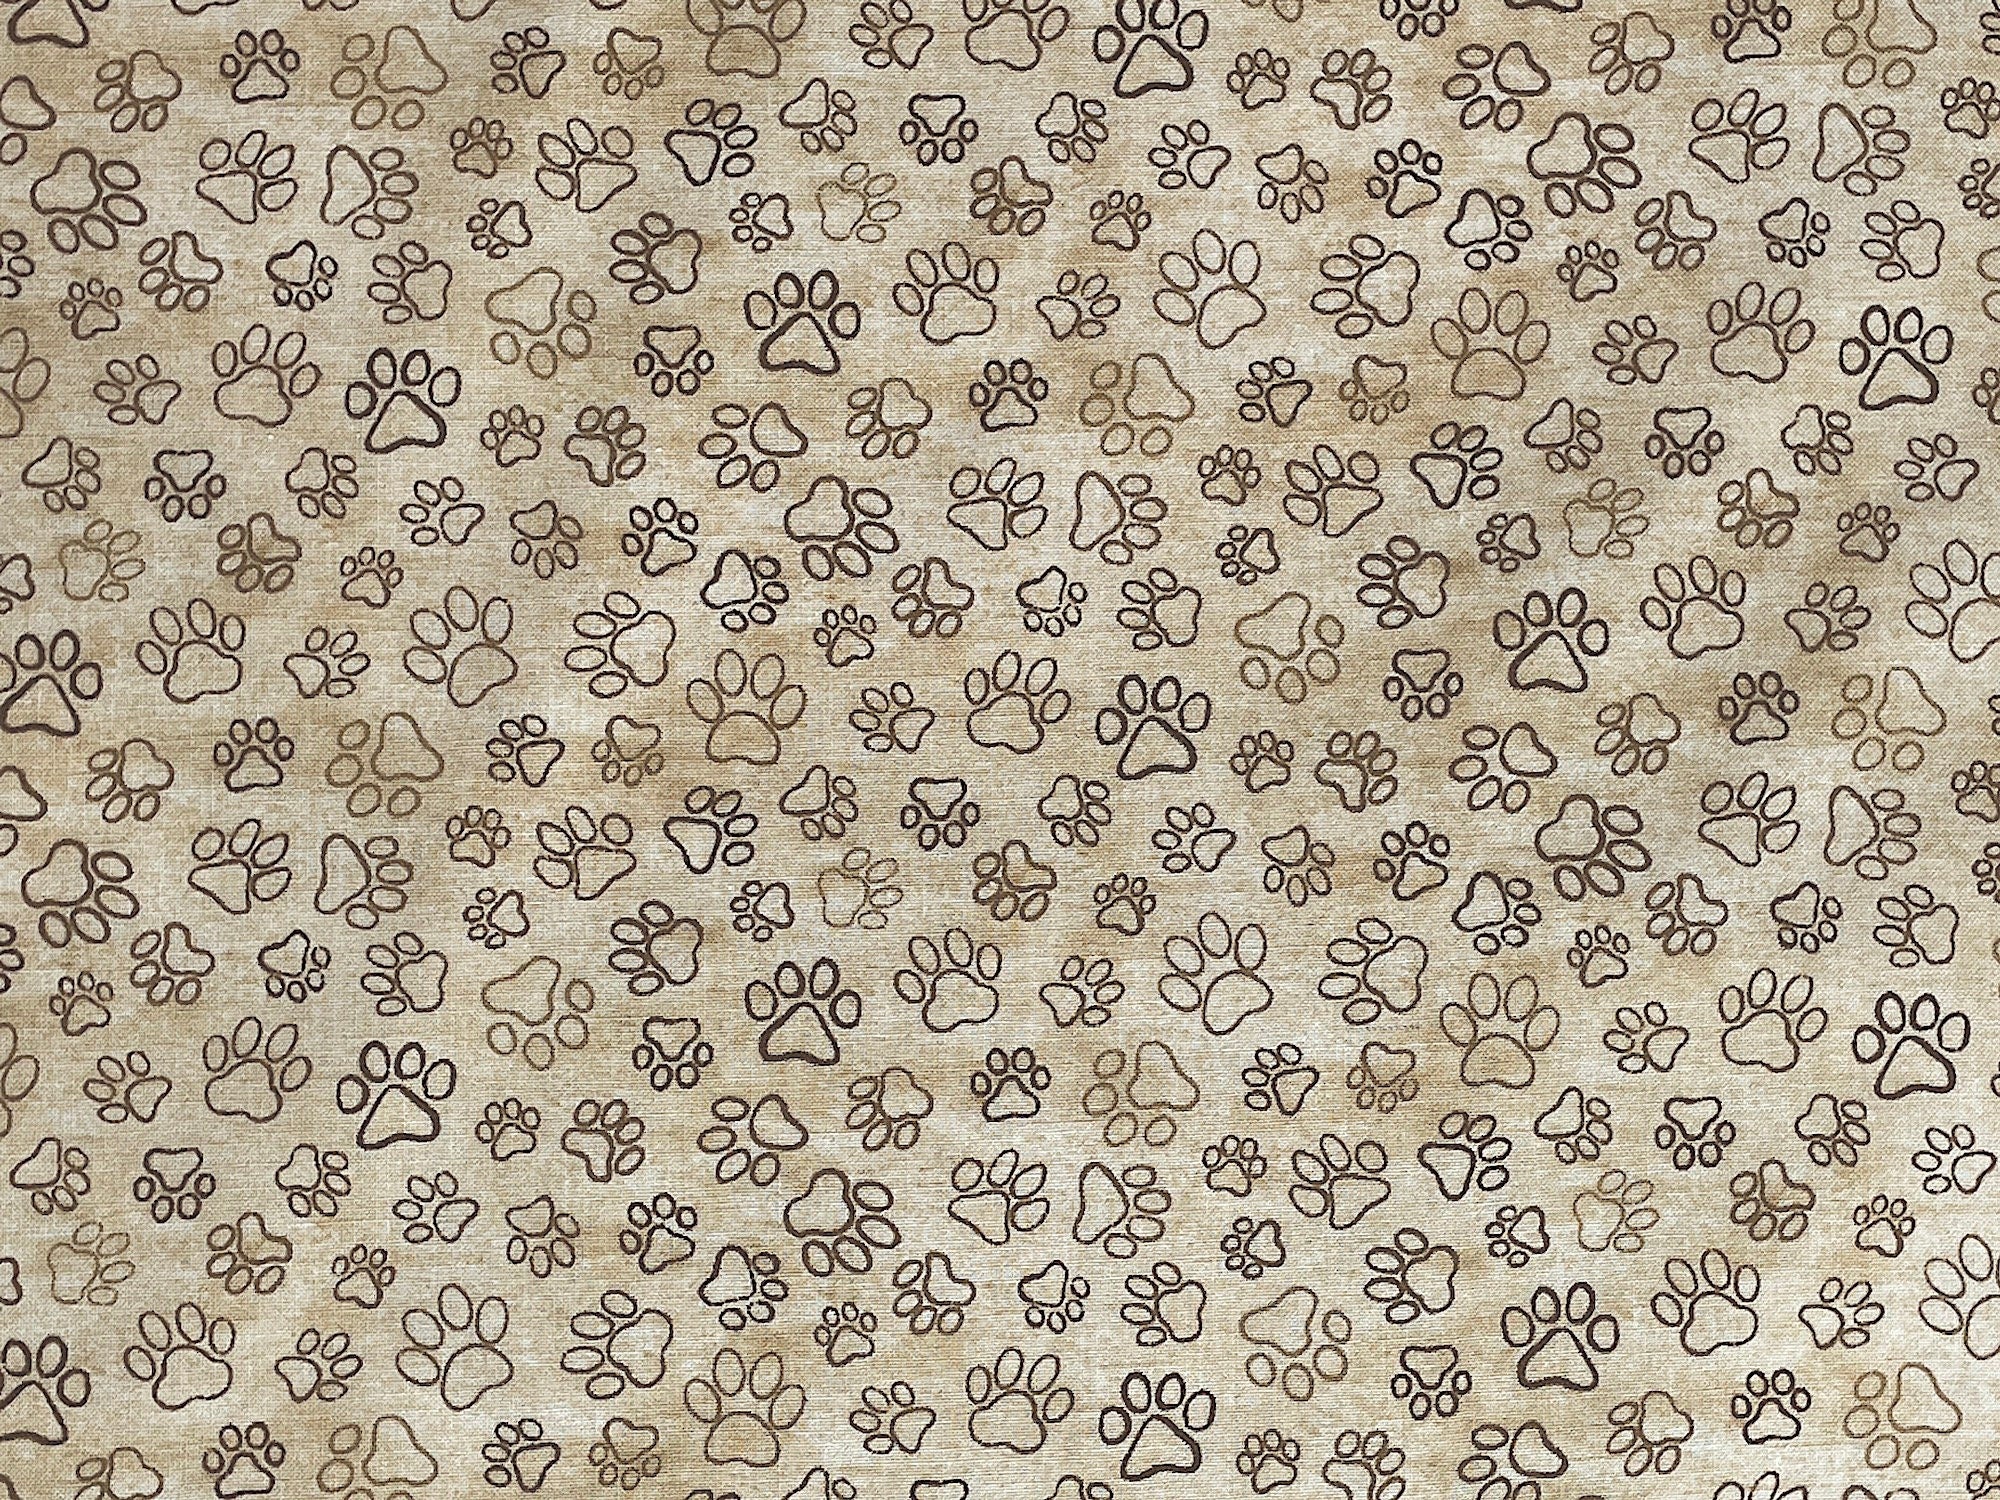 This cream colored fabric is covered with light tan and brown paw prints